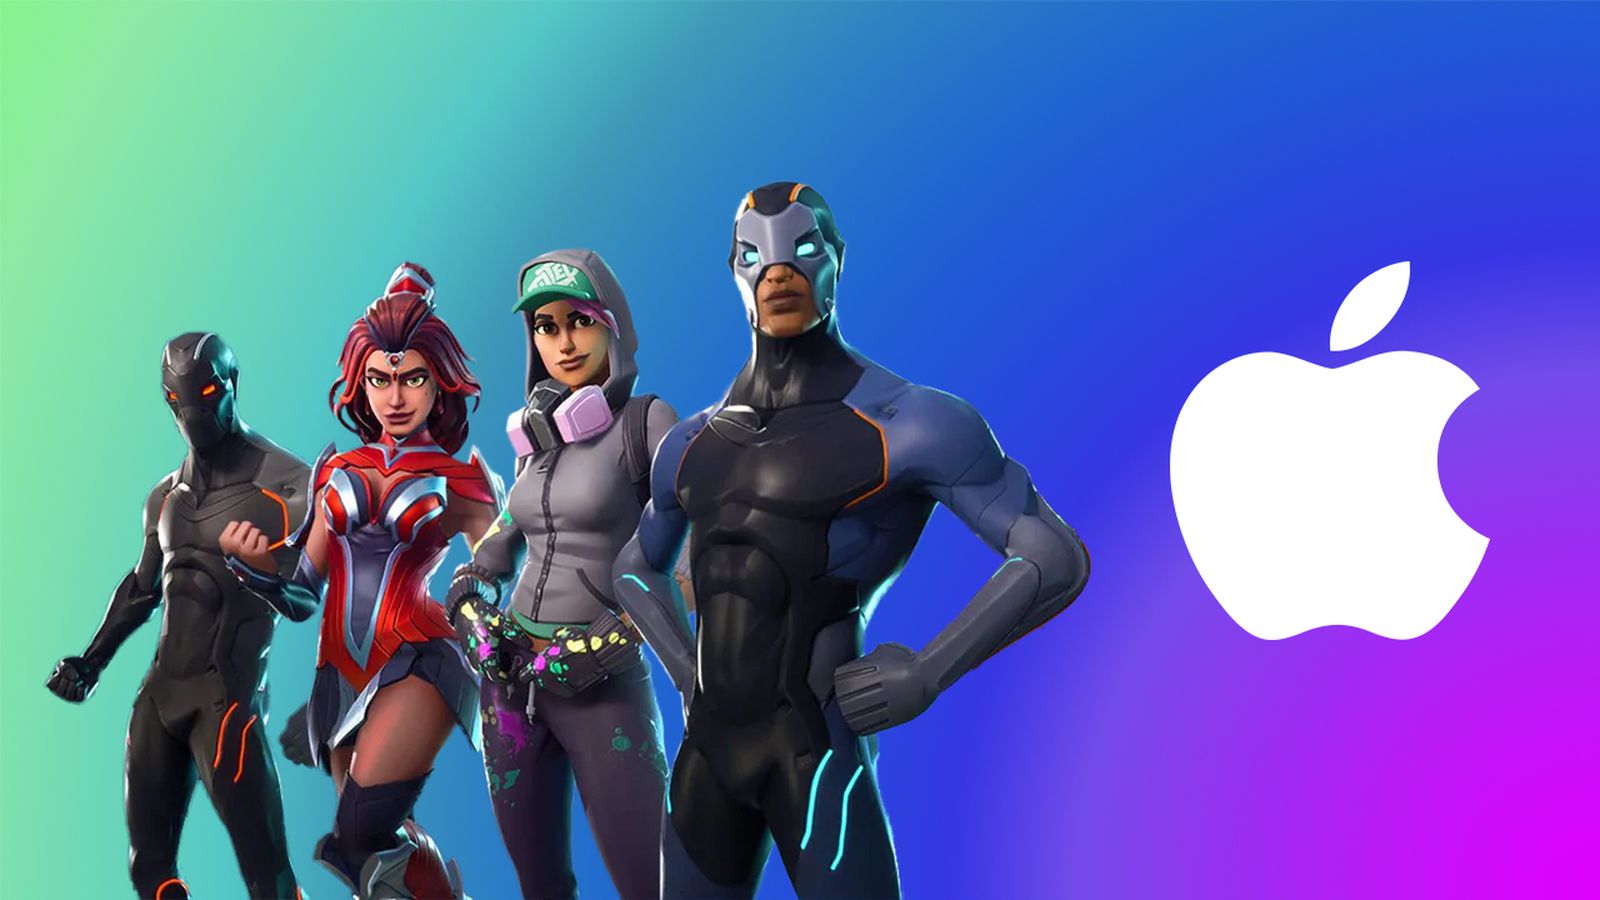 Epic CEO Tim Sweeney Admits App Store's 30% Cut Is Similar to Consoles, Would Have Accepted Special Deal With Apple